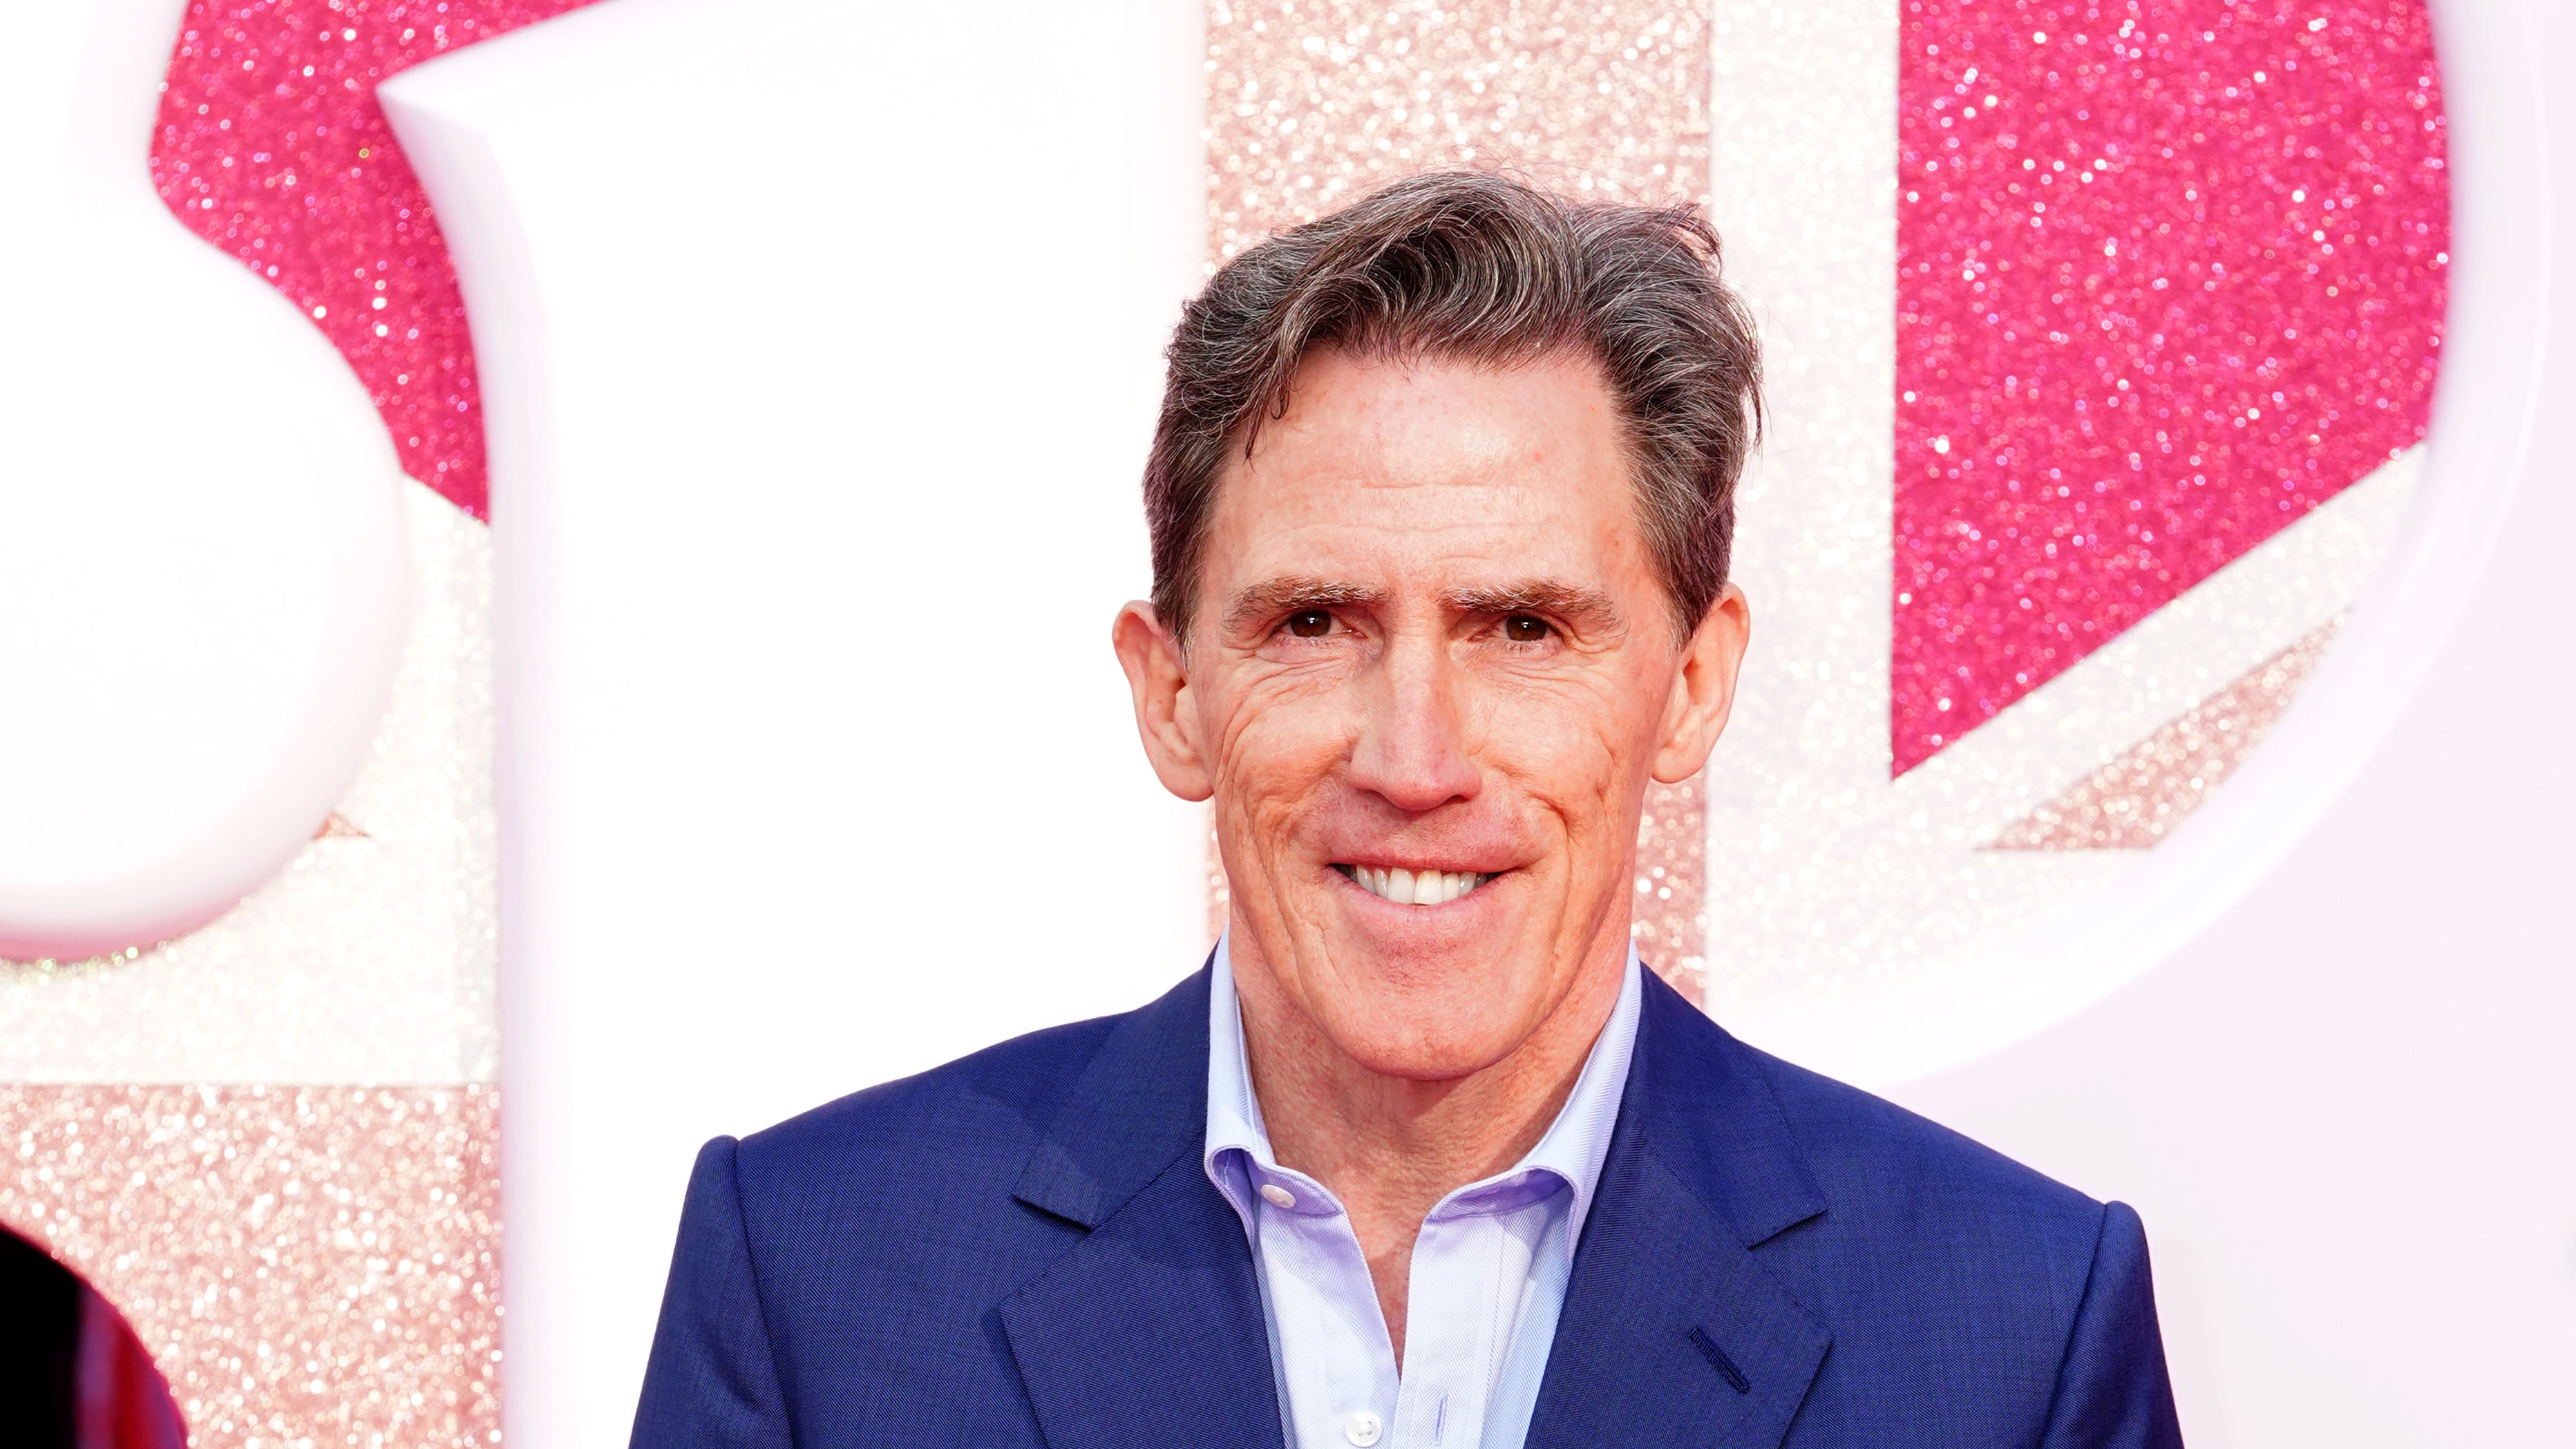 Rob Brydon stars as Uncle Bryn in the show